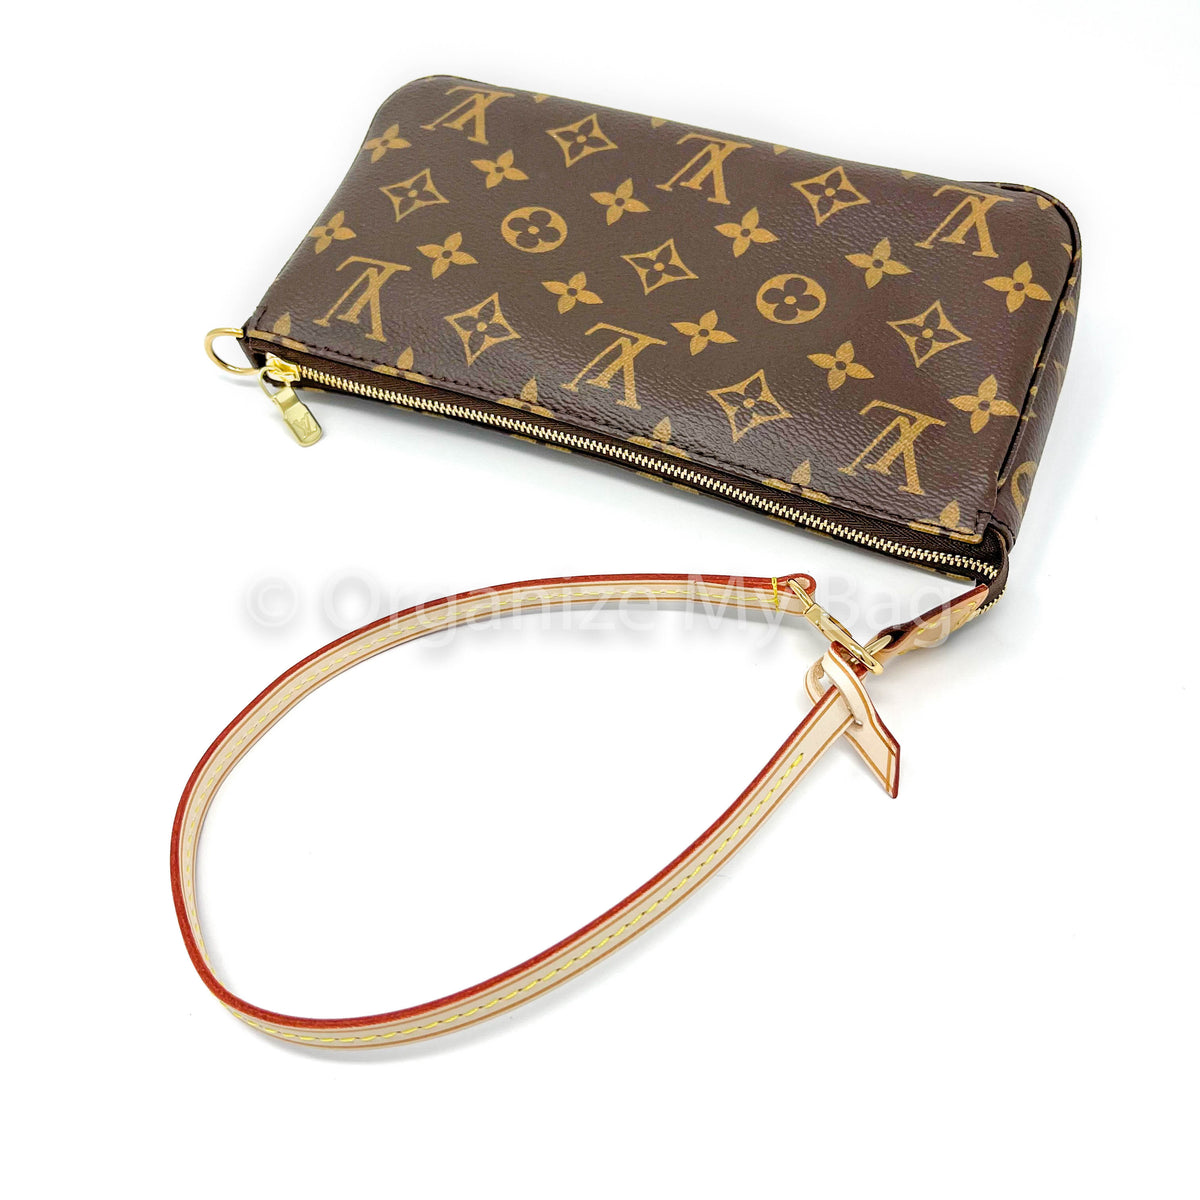 1 High Quality Vachetta Leather Replacement Strap fits Louis Vuitton  Monogram